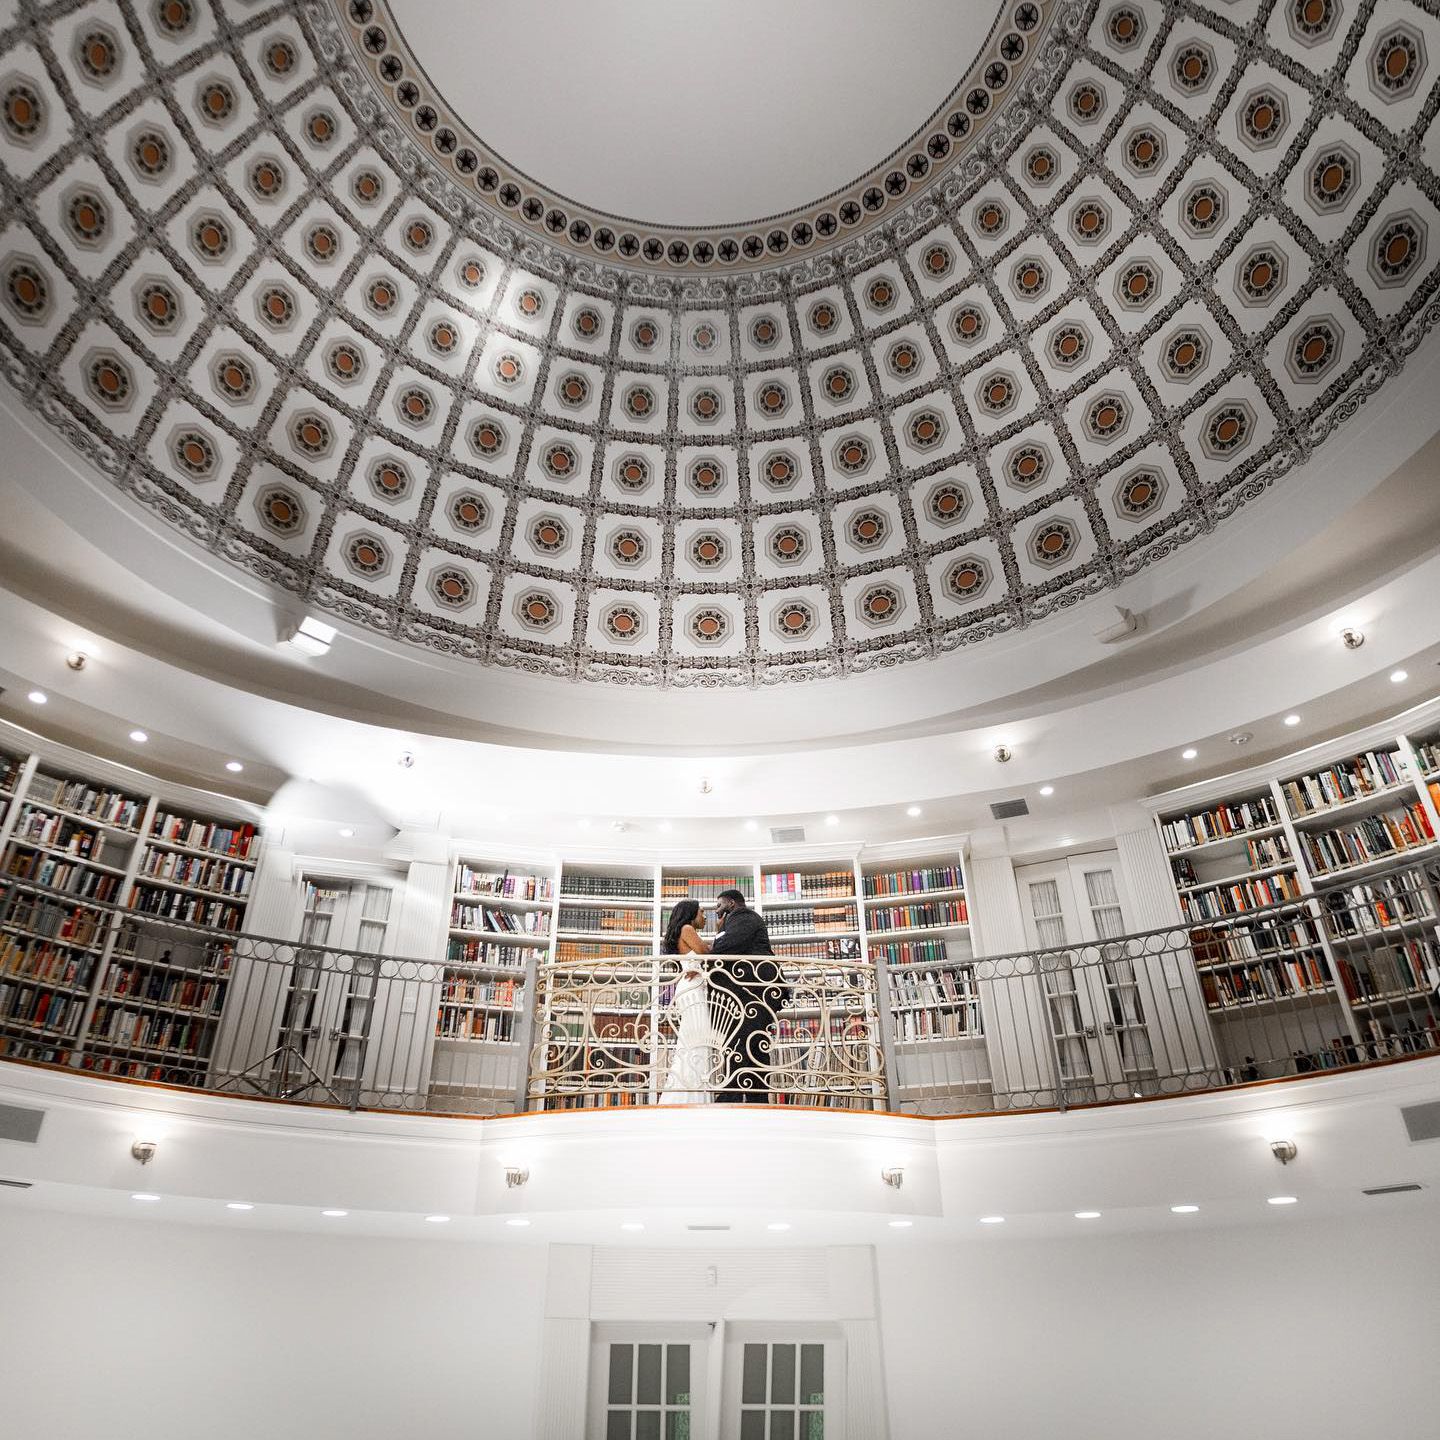 image of Whitehurst Gallery library and dome with a bride and groom